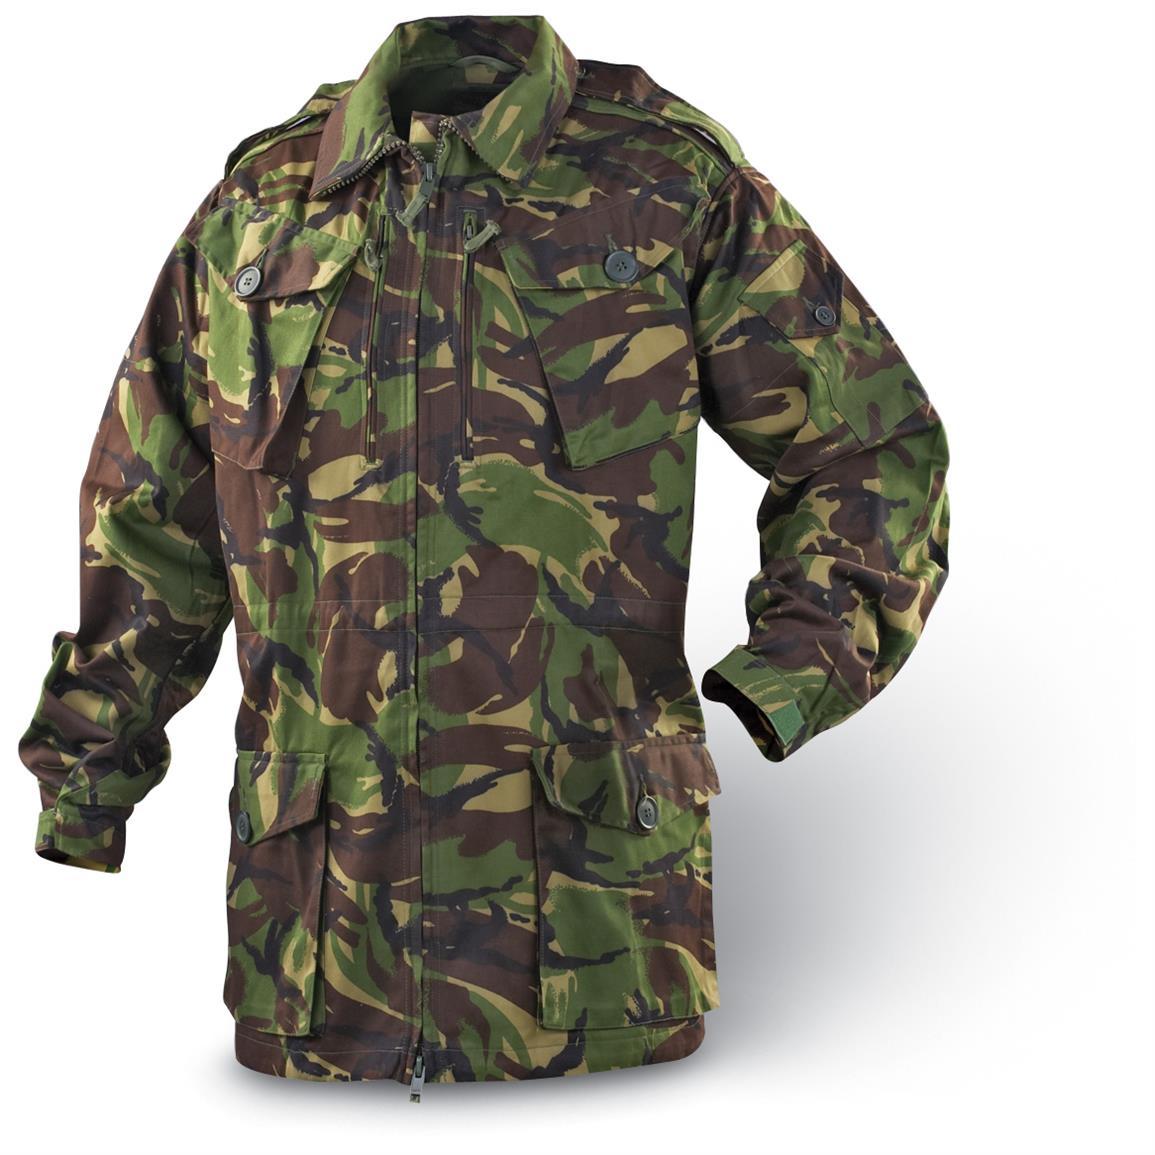 Used British DPM Field Jacket - 584522, Camo Jackets at Sportsman's Guide